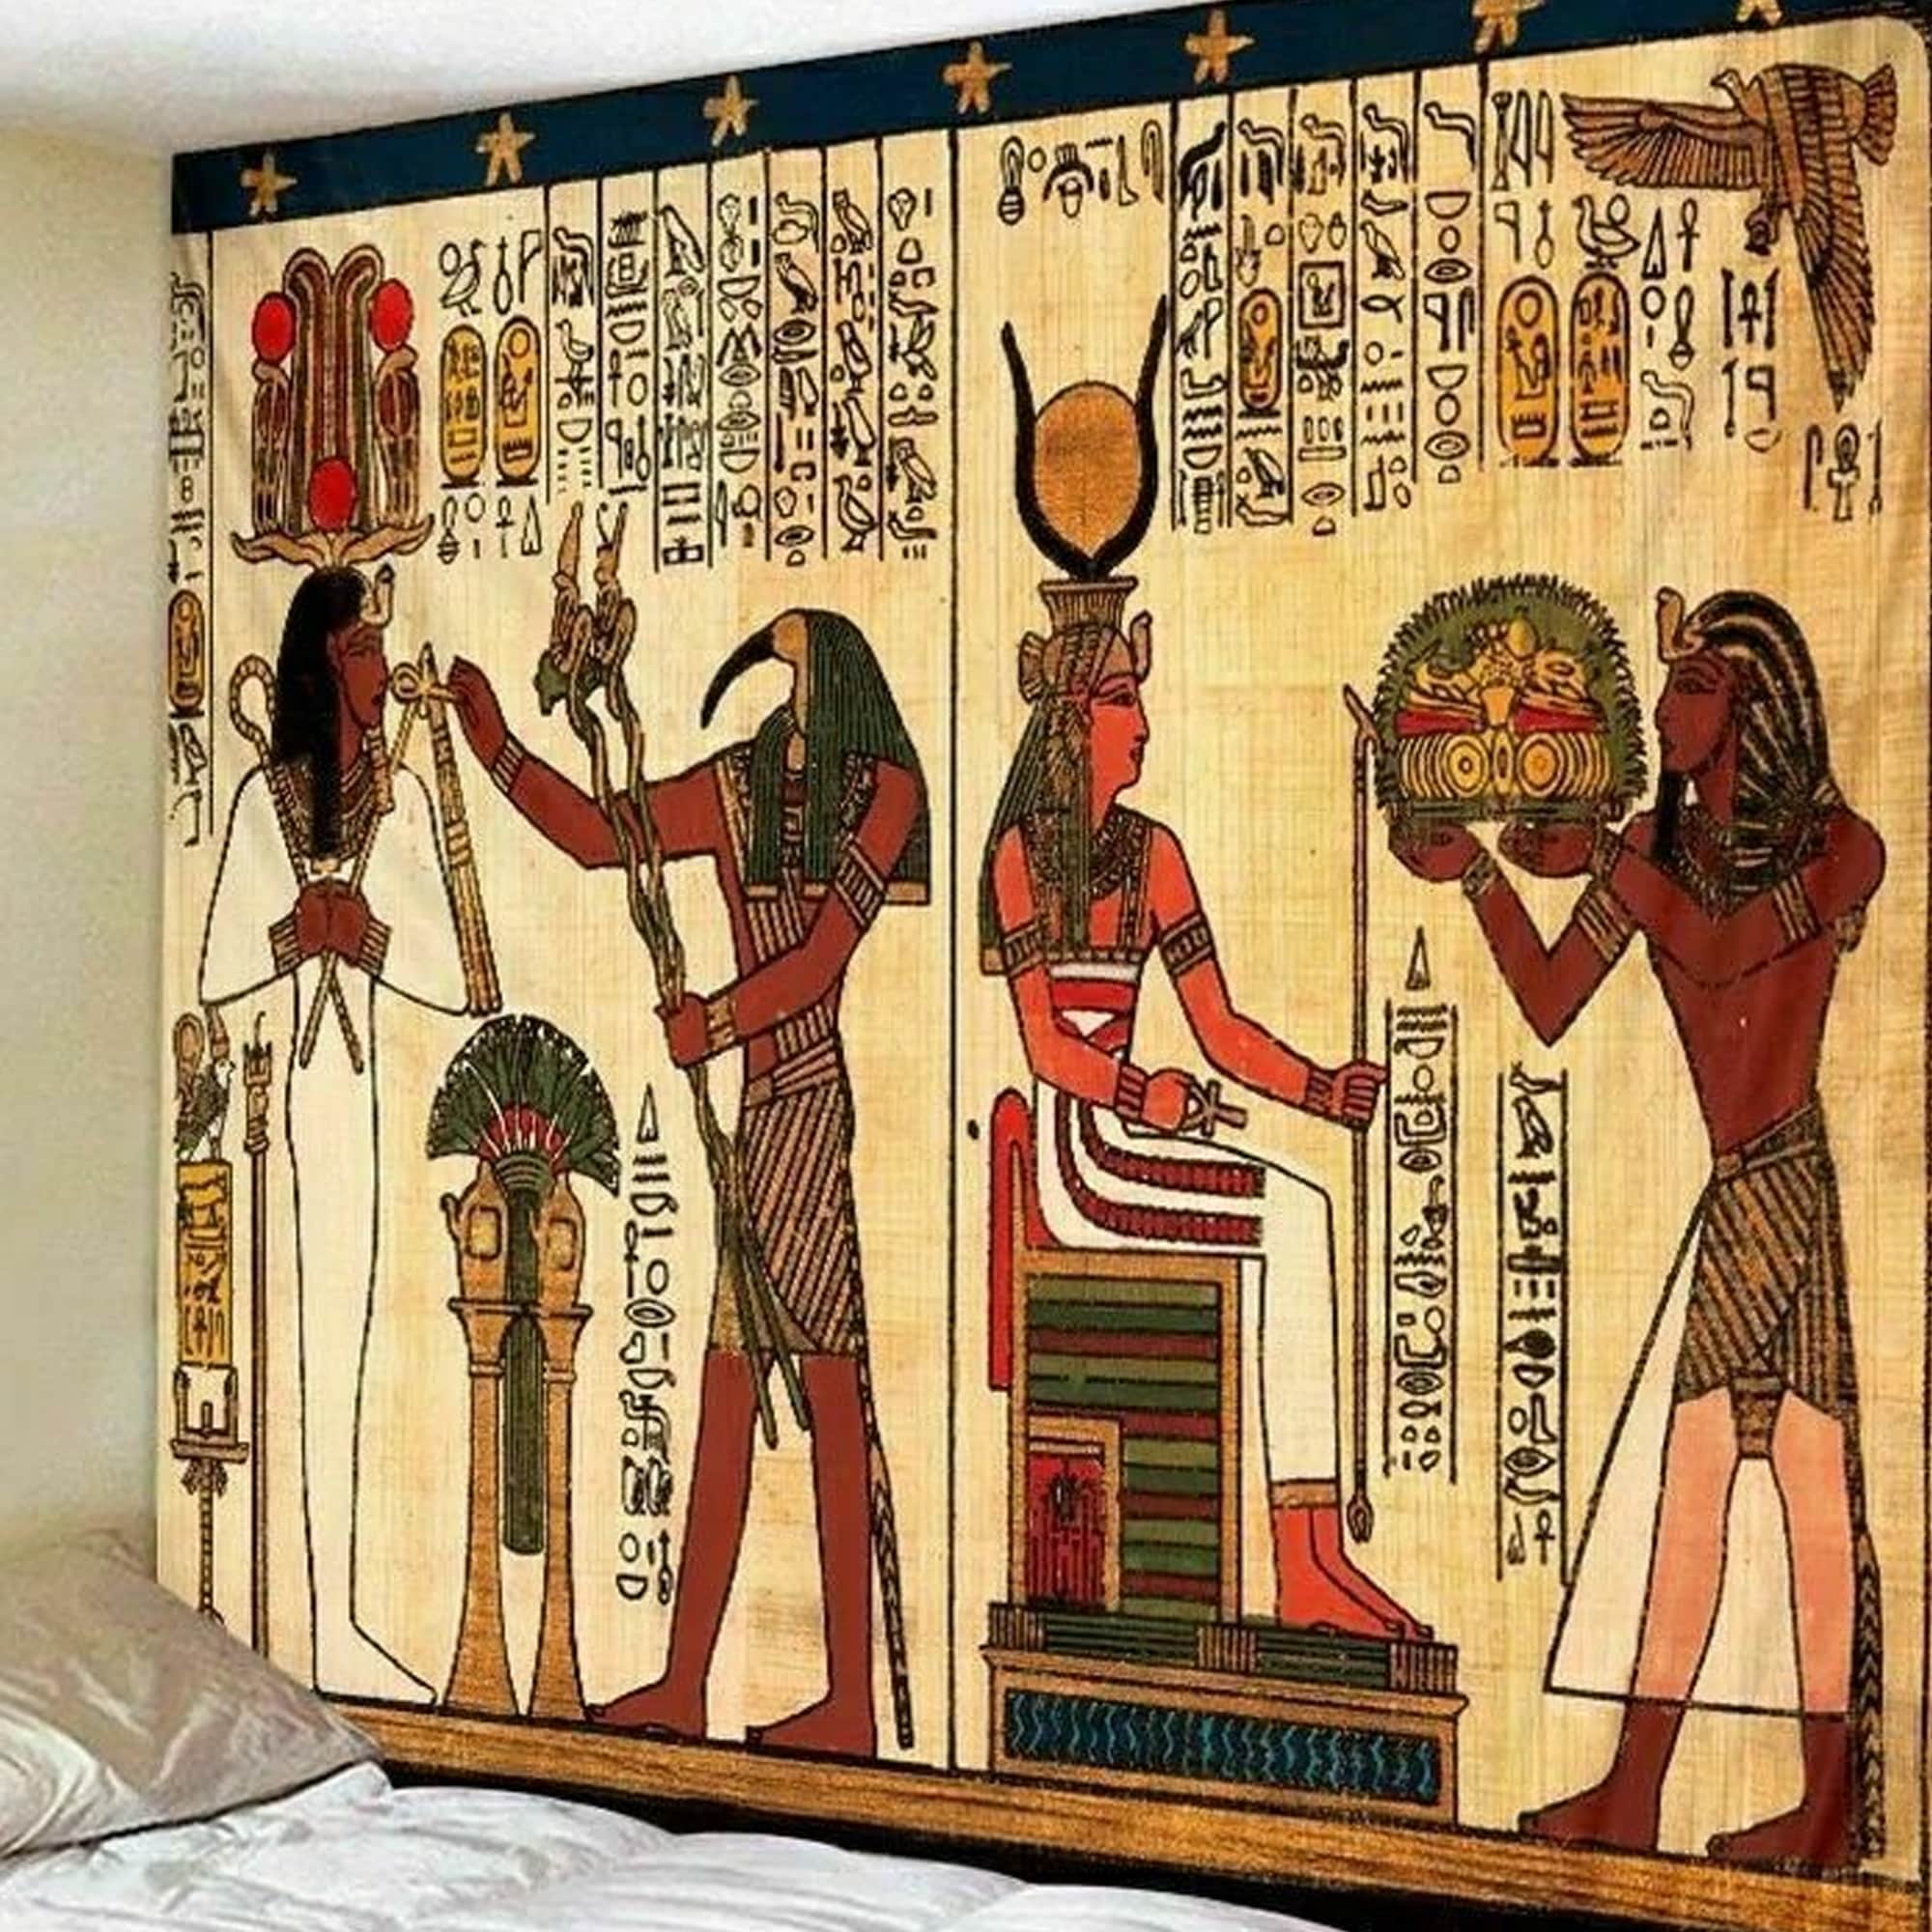 Ancient Egypt Printed Tapestry Wall Hanging Polyester Blanket Carpet Room Decor 